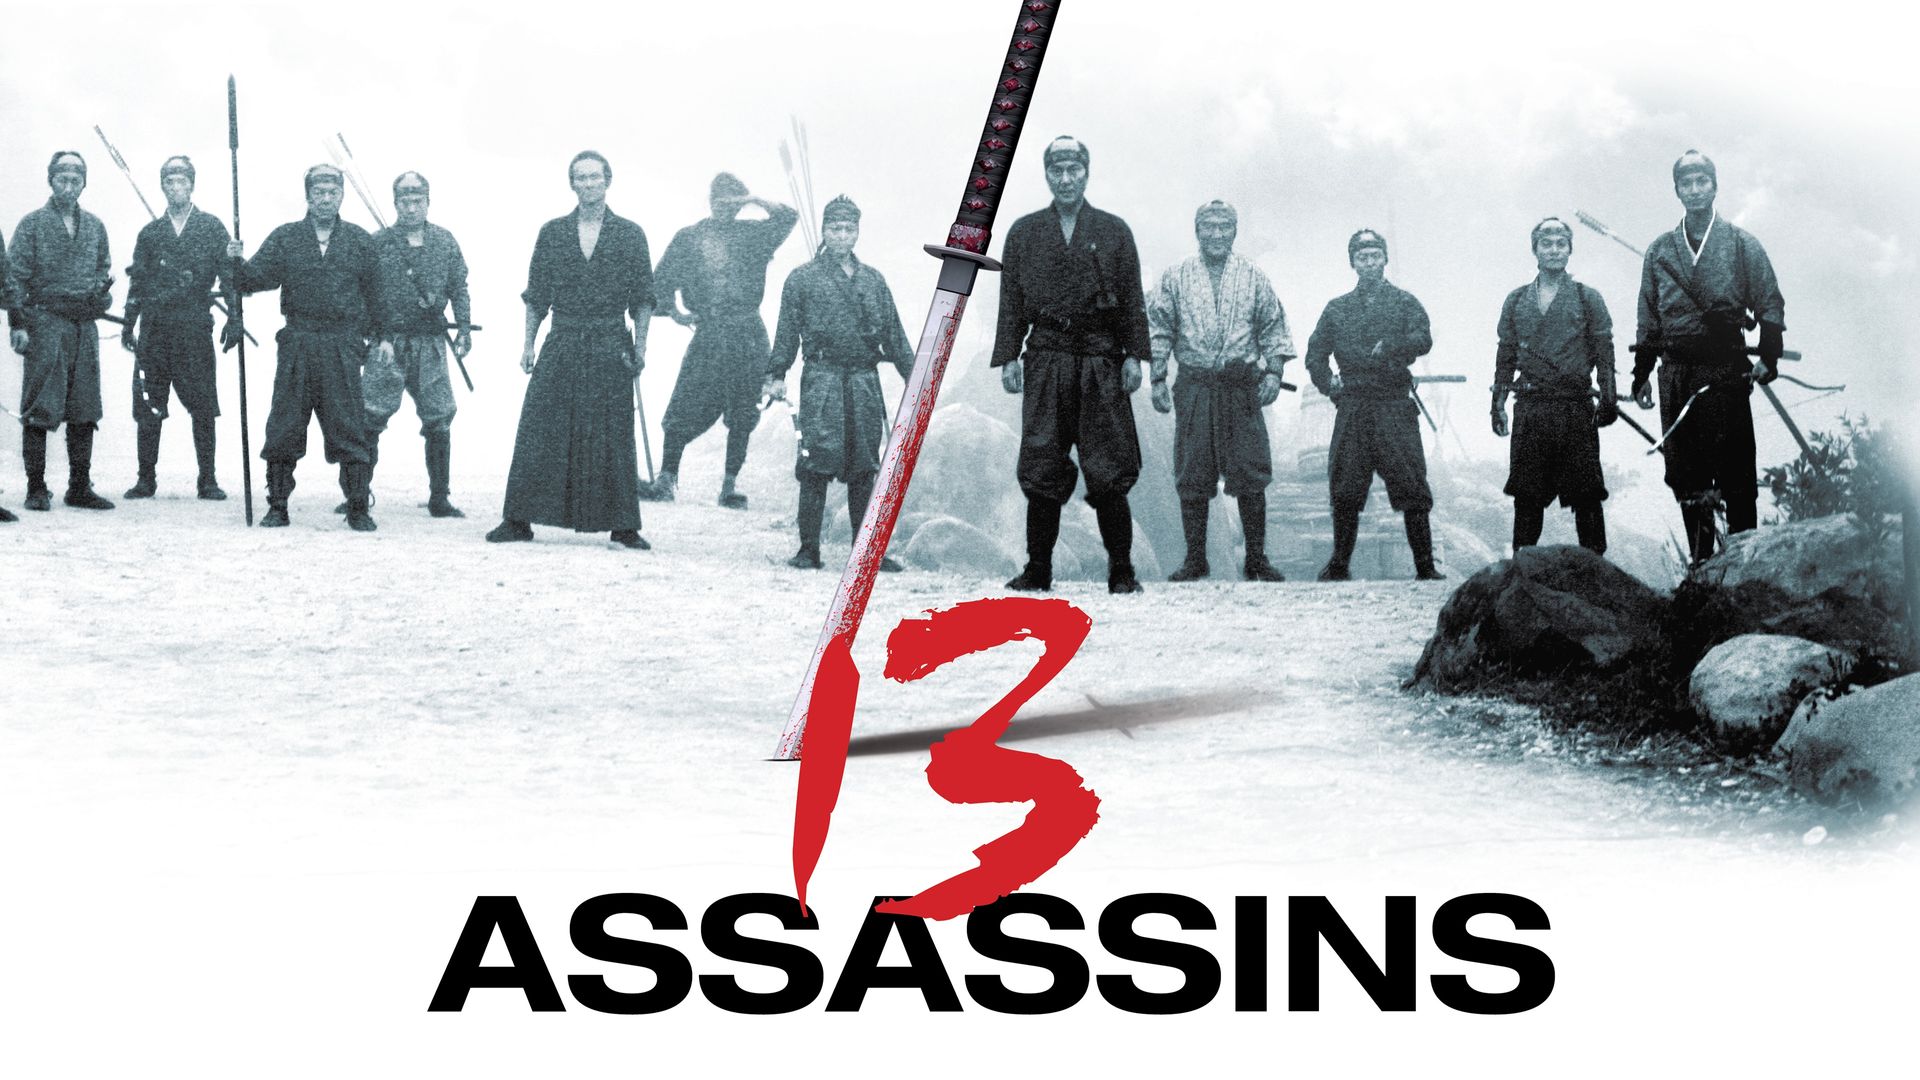 33-facts-about-the-movie-13-assassins